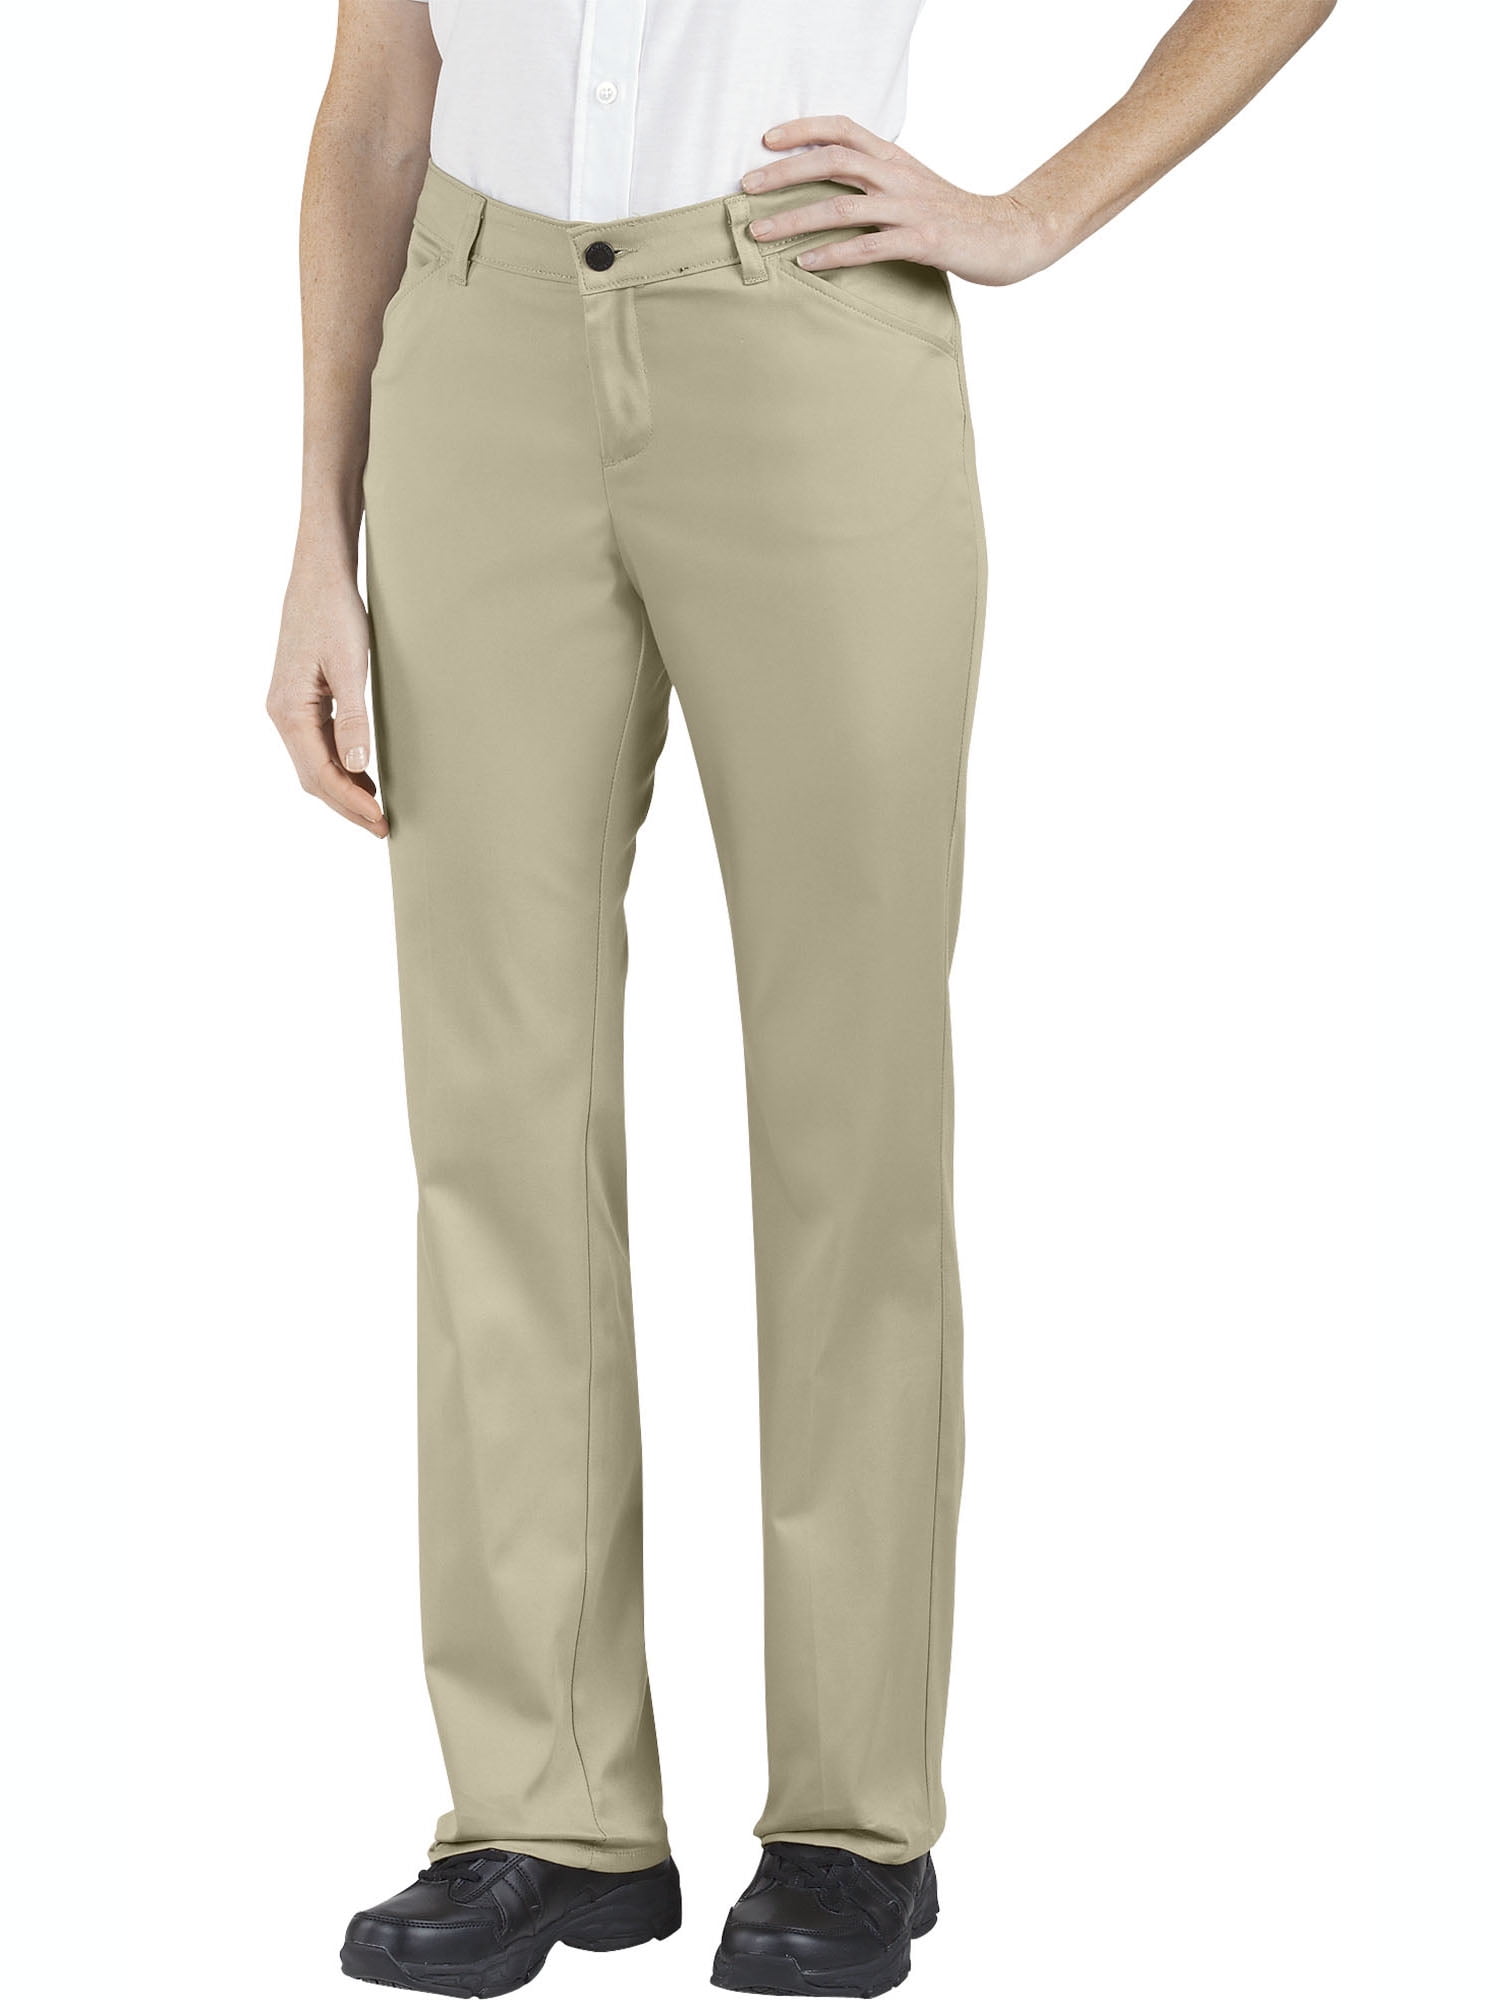 Women's Relaxed Straight Twill Pants